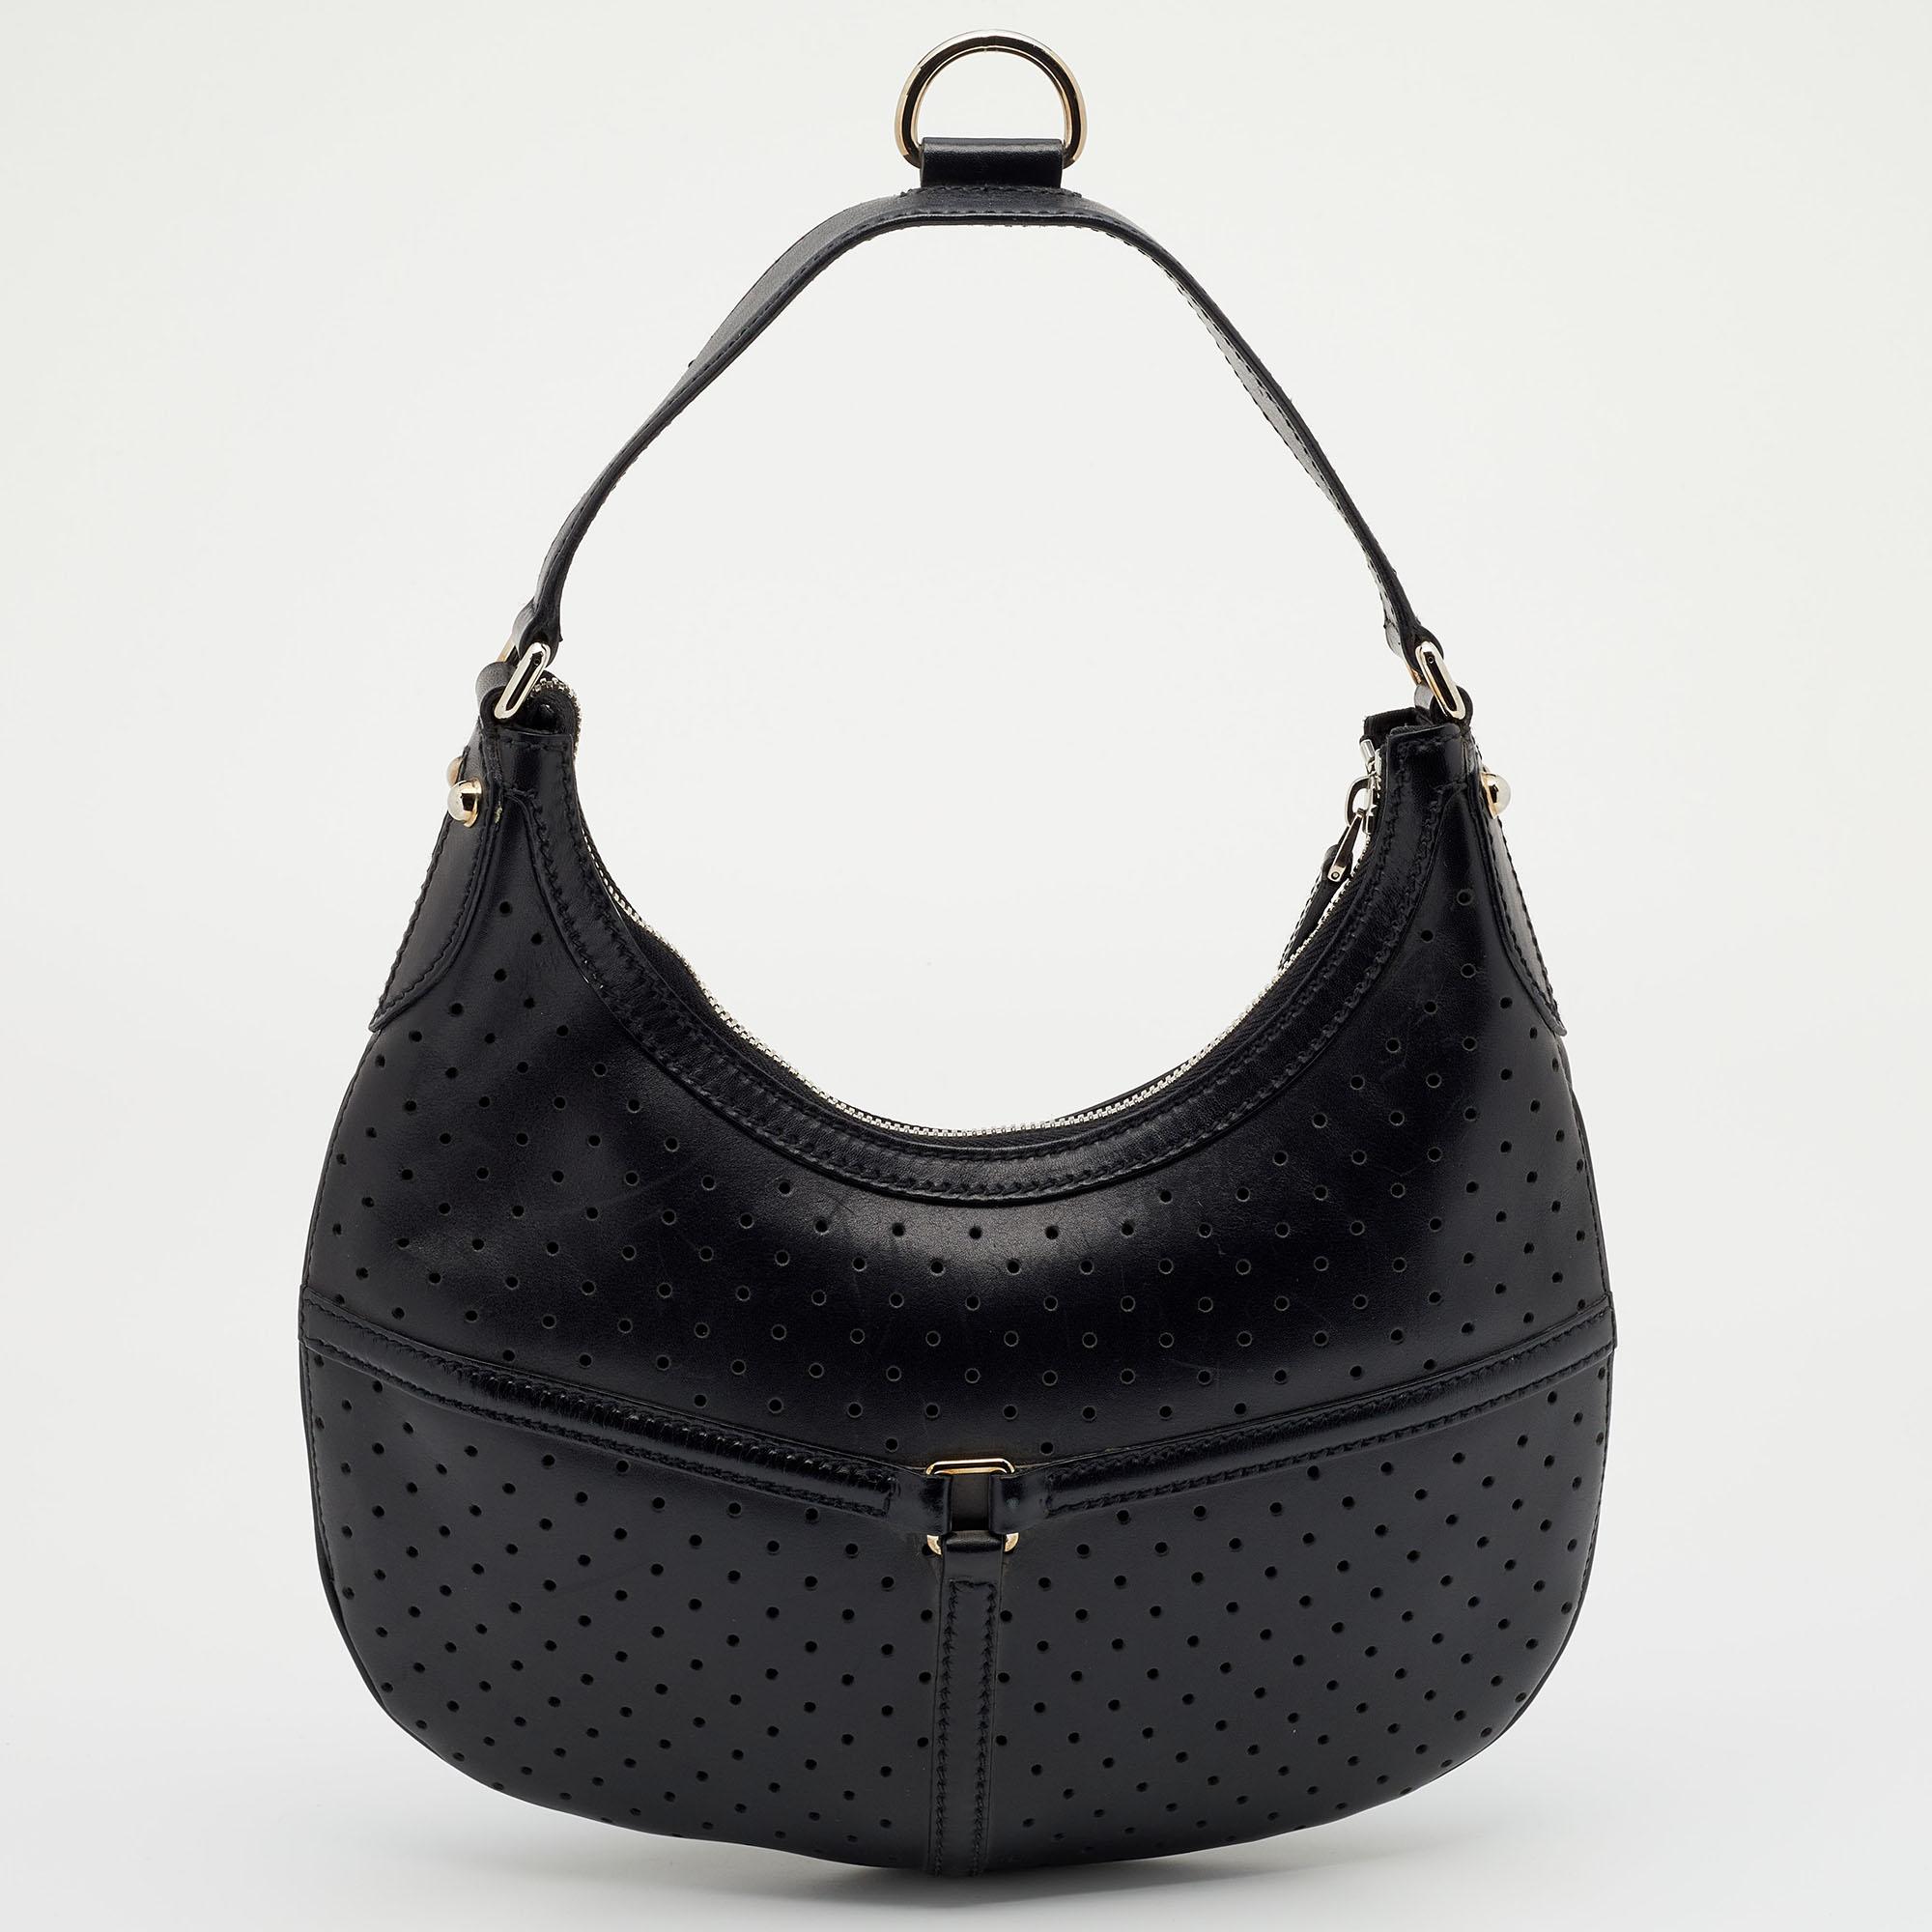 This Gucci hobo will conveniently hold all your essentials in great style. Fashioned in perforated leather, this classic bag comes with a top zip closure and the GG logo on the front. This hobo is ideally sized to carry your essentials like cell